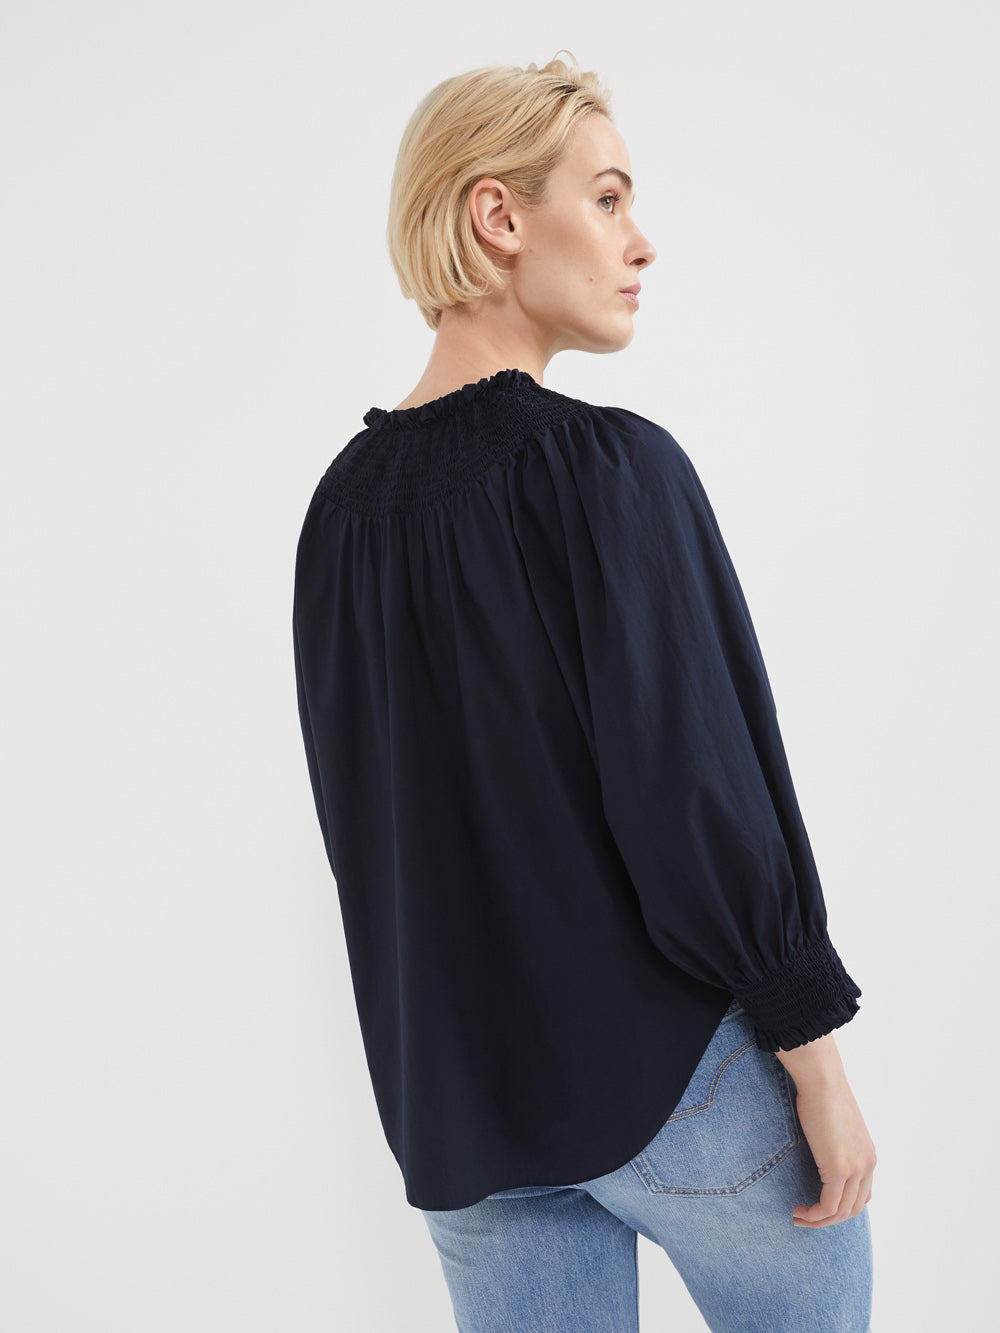 The Cotton Voile Shirred Detail Top